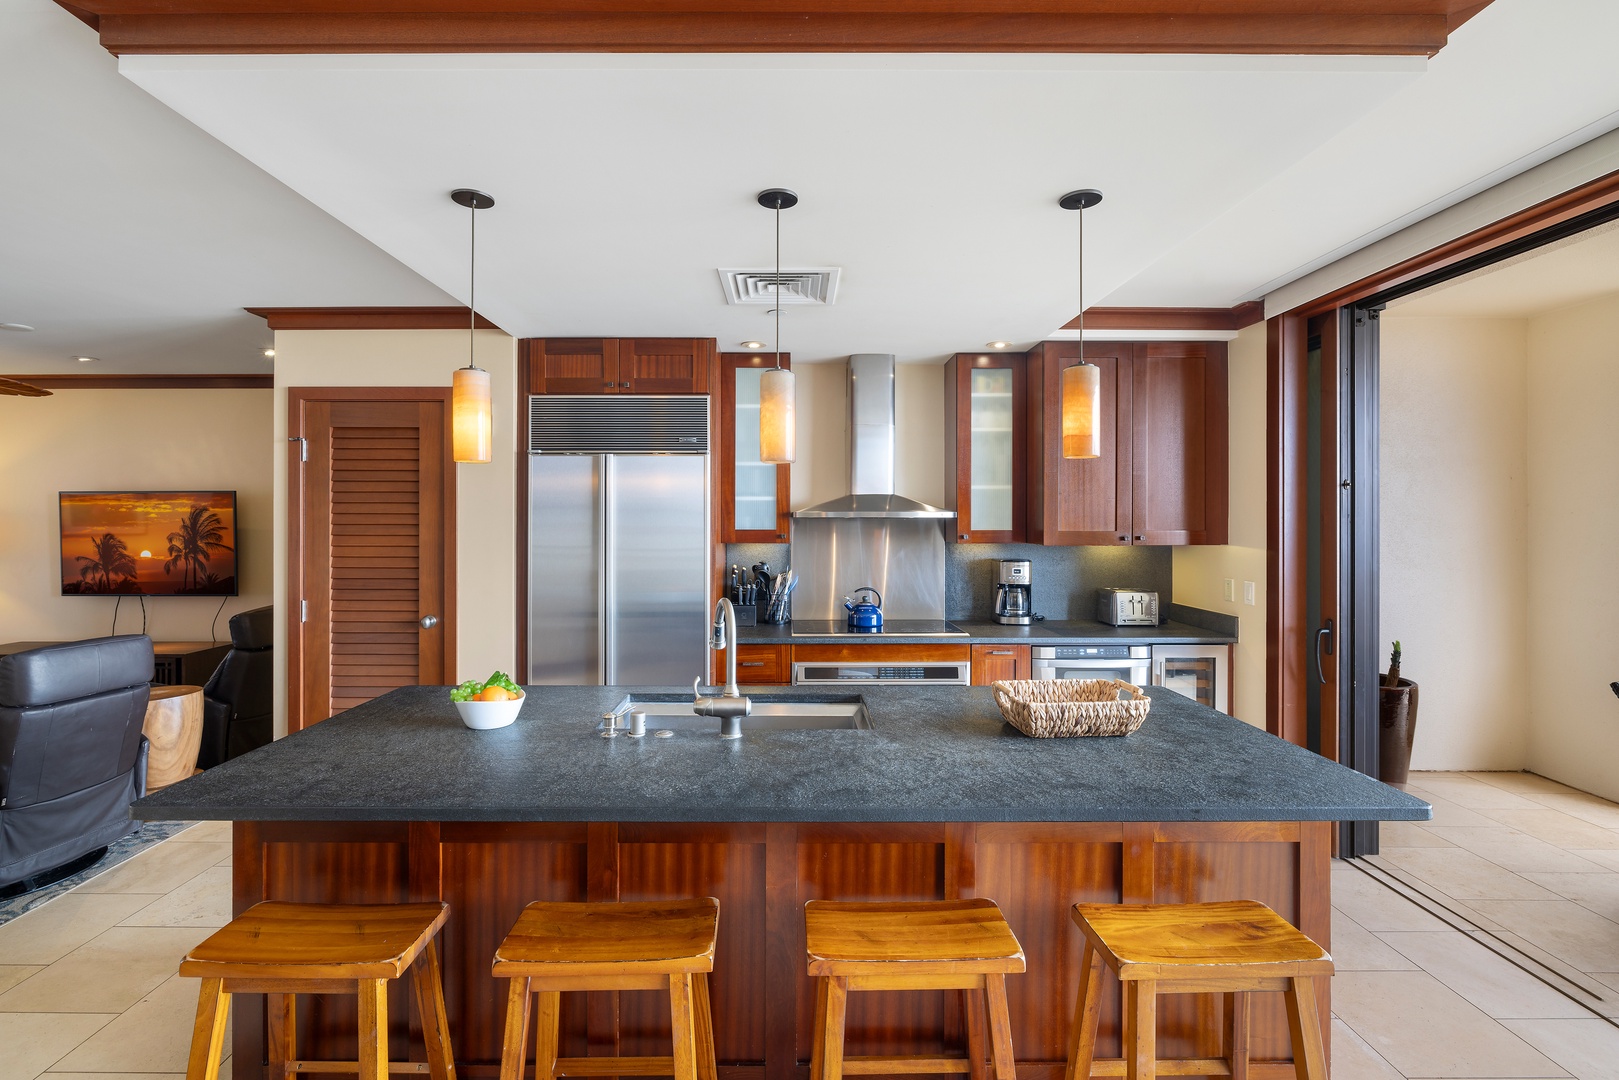 Kapolei Vacation Rentals, Ko Olina Beach Villas O1105 - The kitchen island seating for visiting with the chef and casual meals.